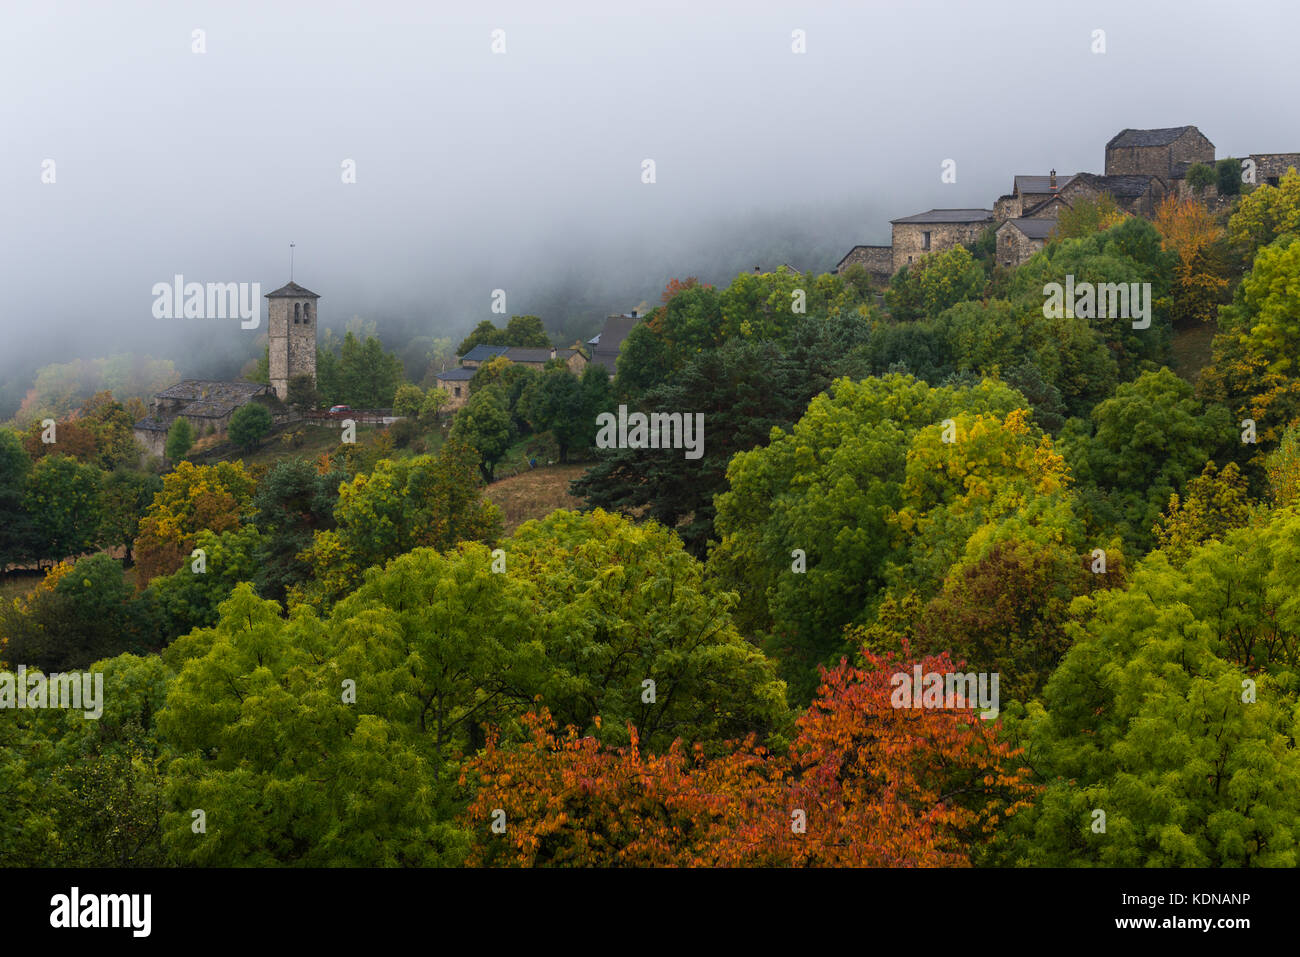 The small village of Fanlo (Huesca) wrapped between fog and vegetation Stock Photo